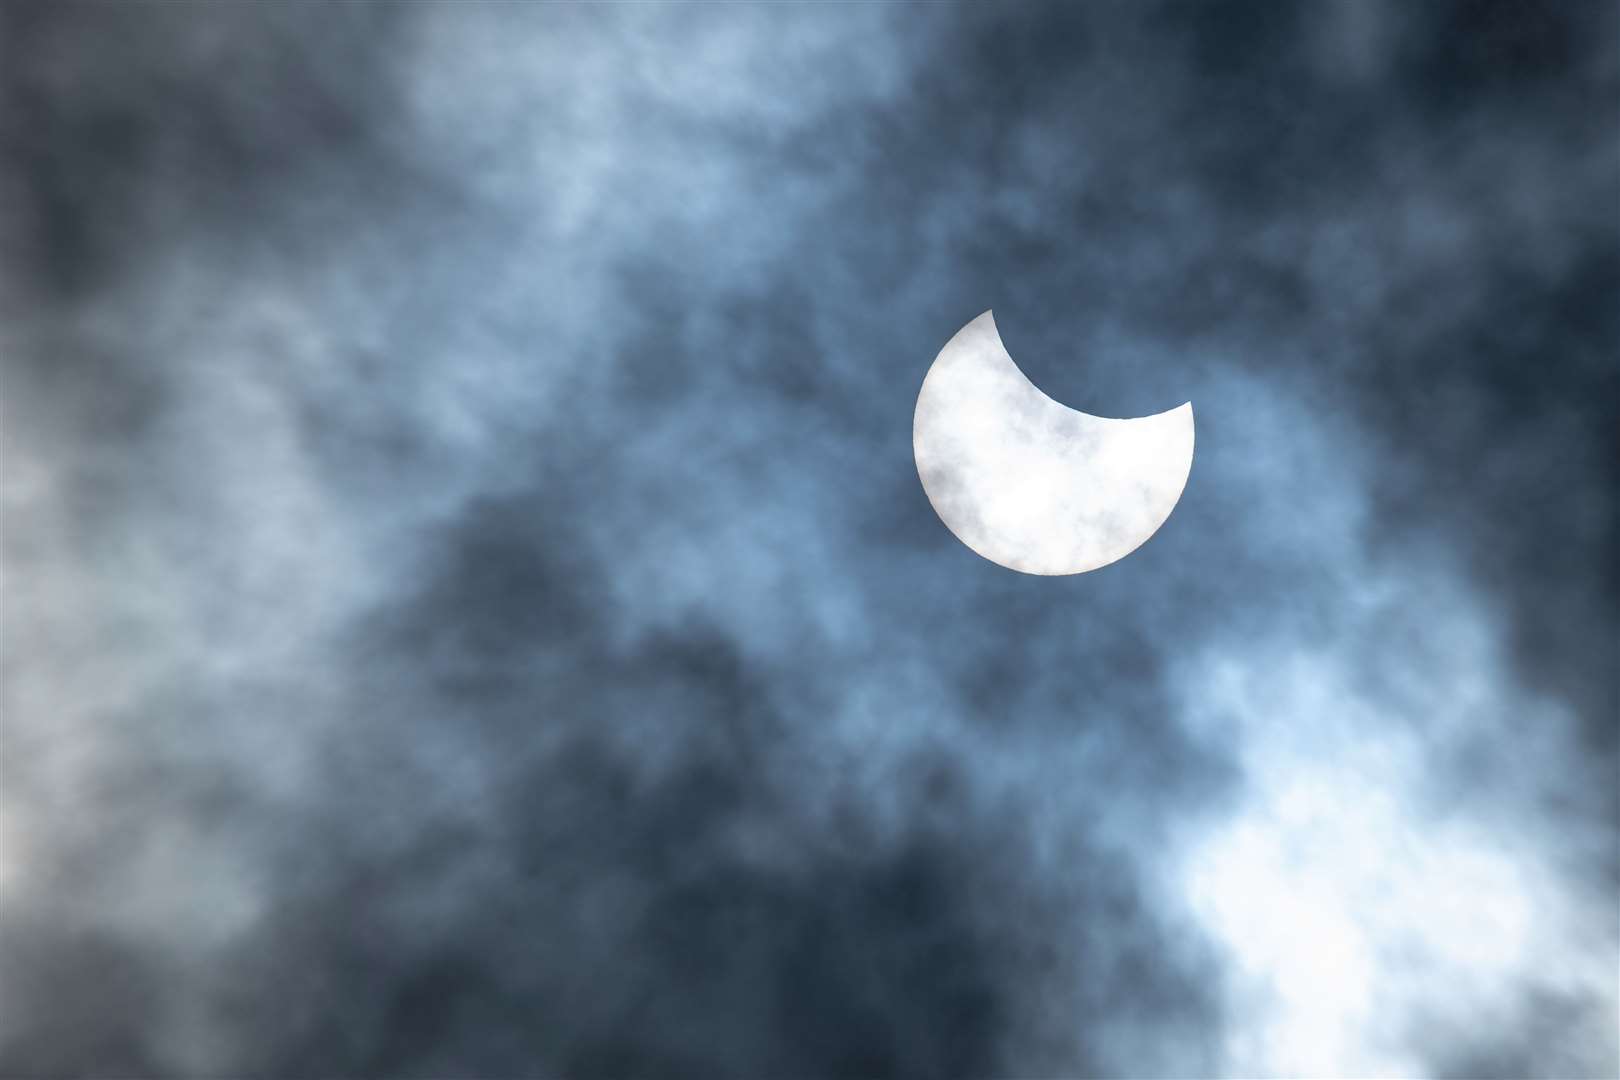 Paul Brown from Reay captured this image of the partial solar eclipse yesterday morning.